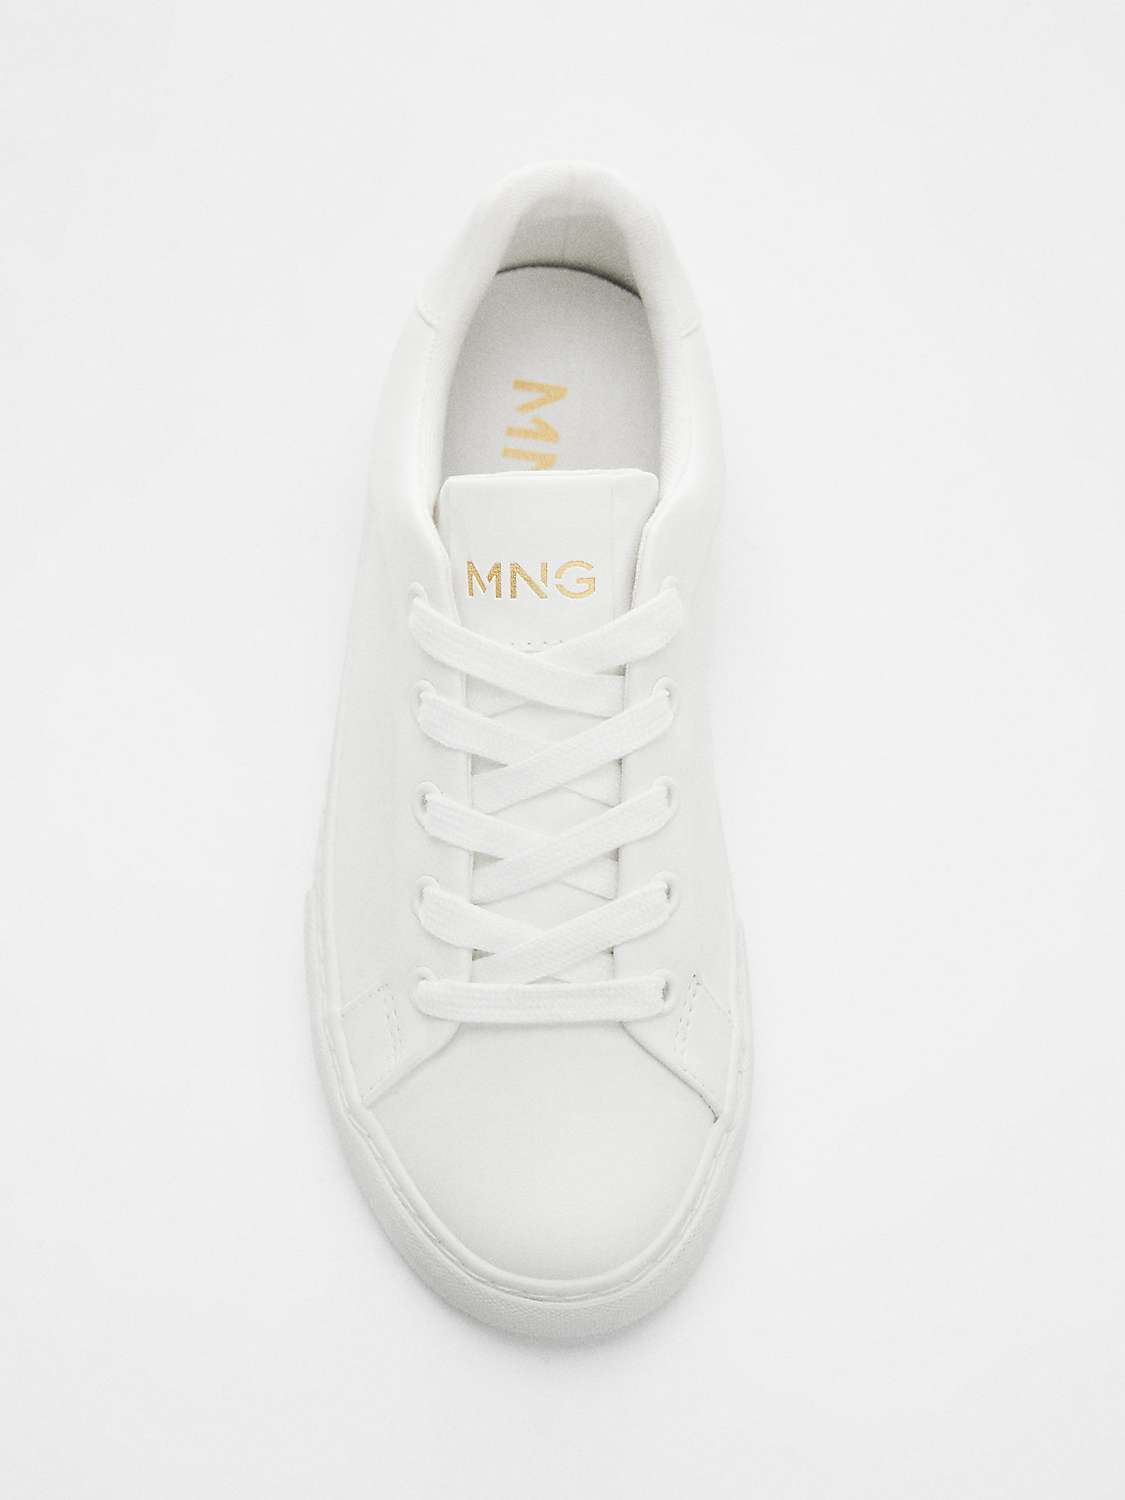 Buy Mango Kids' Adam Lace Up Trainers, White Online at johnlewis.com